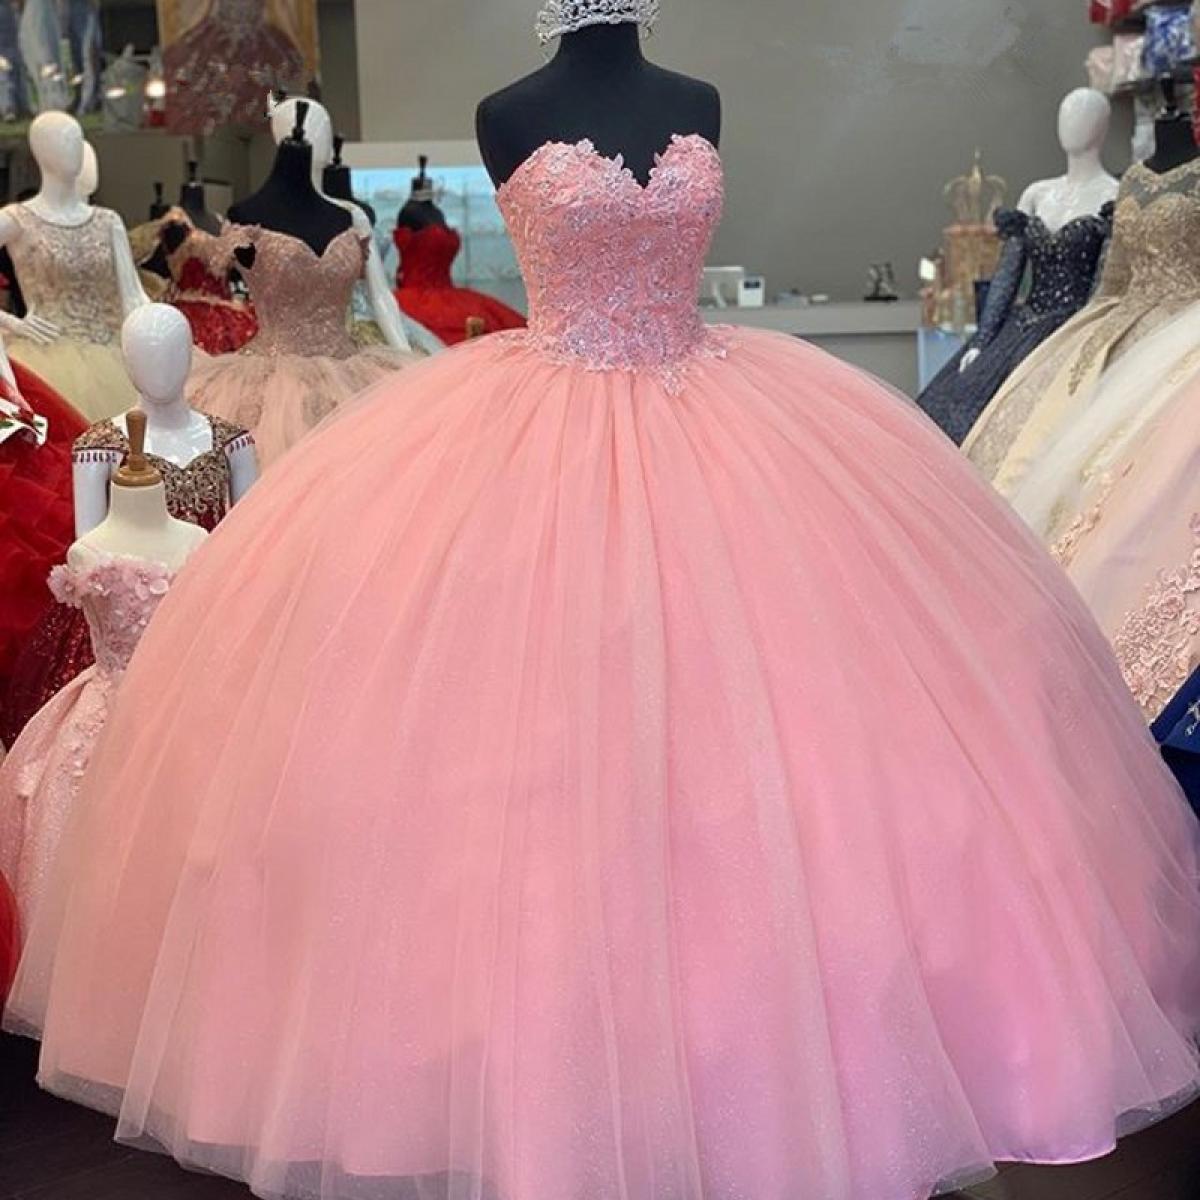 Princess Aqua Beaded Quinceanera Dresses Ball Gown Puffy Lady Prom Dress  For Sweet 15 Year Girl Birt on Luulla